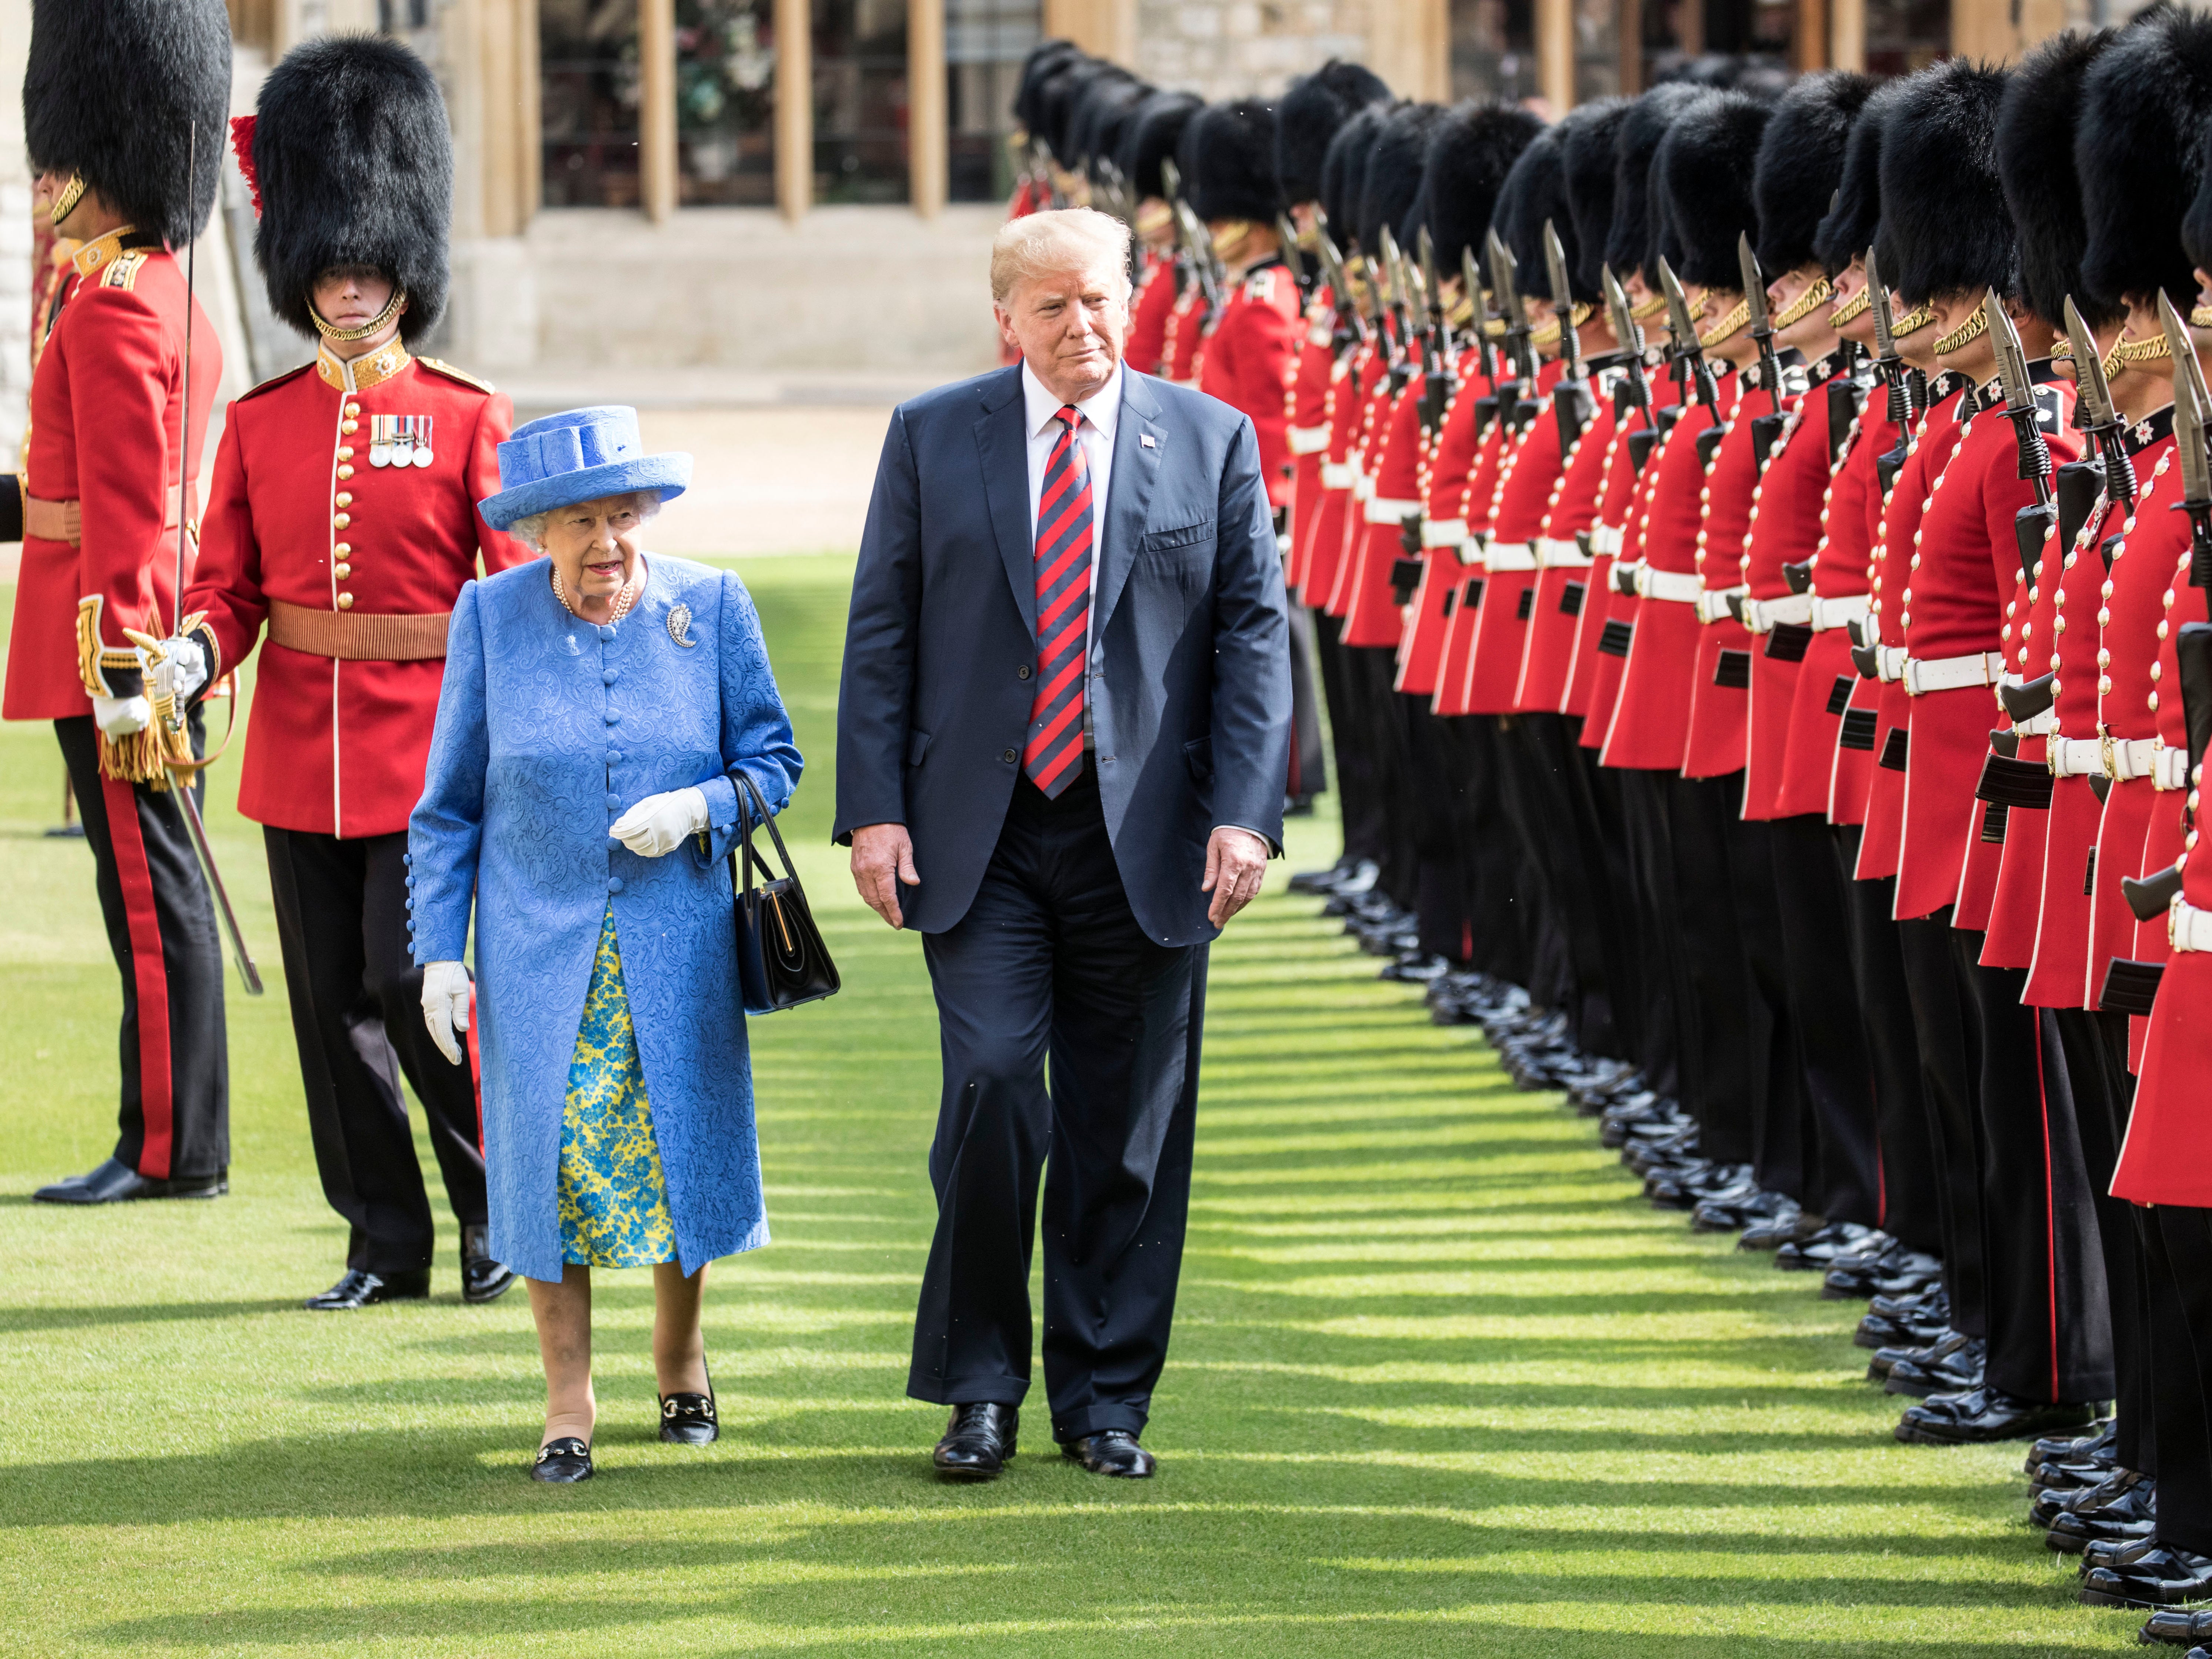 Donald Trump and Britain’s Queen Elizabeth II inspect a Guard of Honour, formed of the Coldstream Guards at Windsor Castle, 13 July 2018